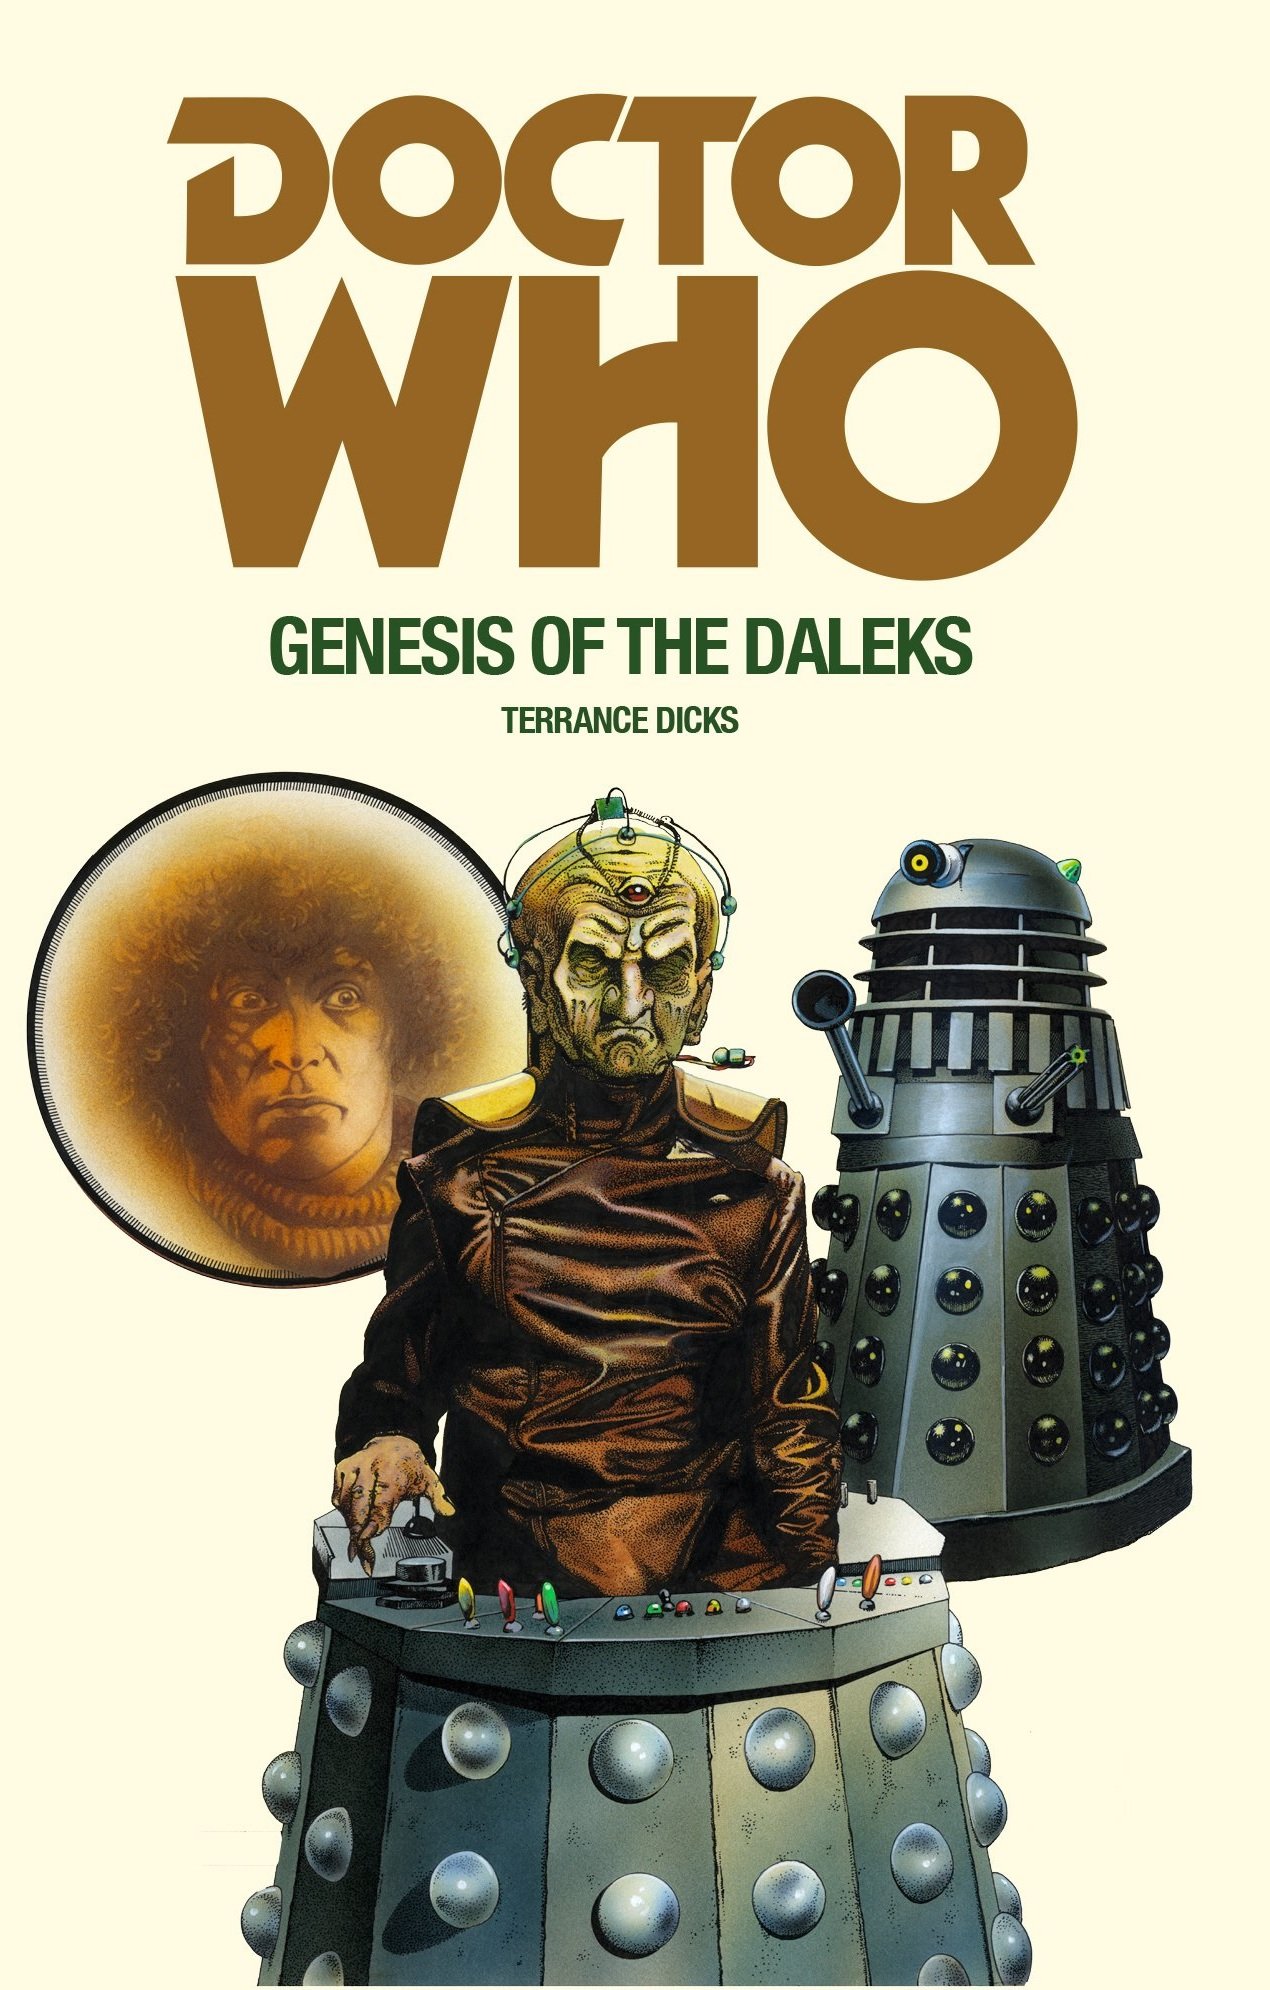 Reviewed: The Essential Terrance Dicks – Doctor Who and the Genesis of the Daleks (Target)